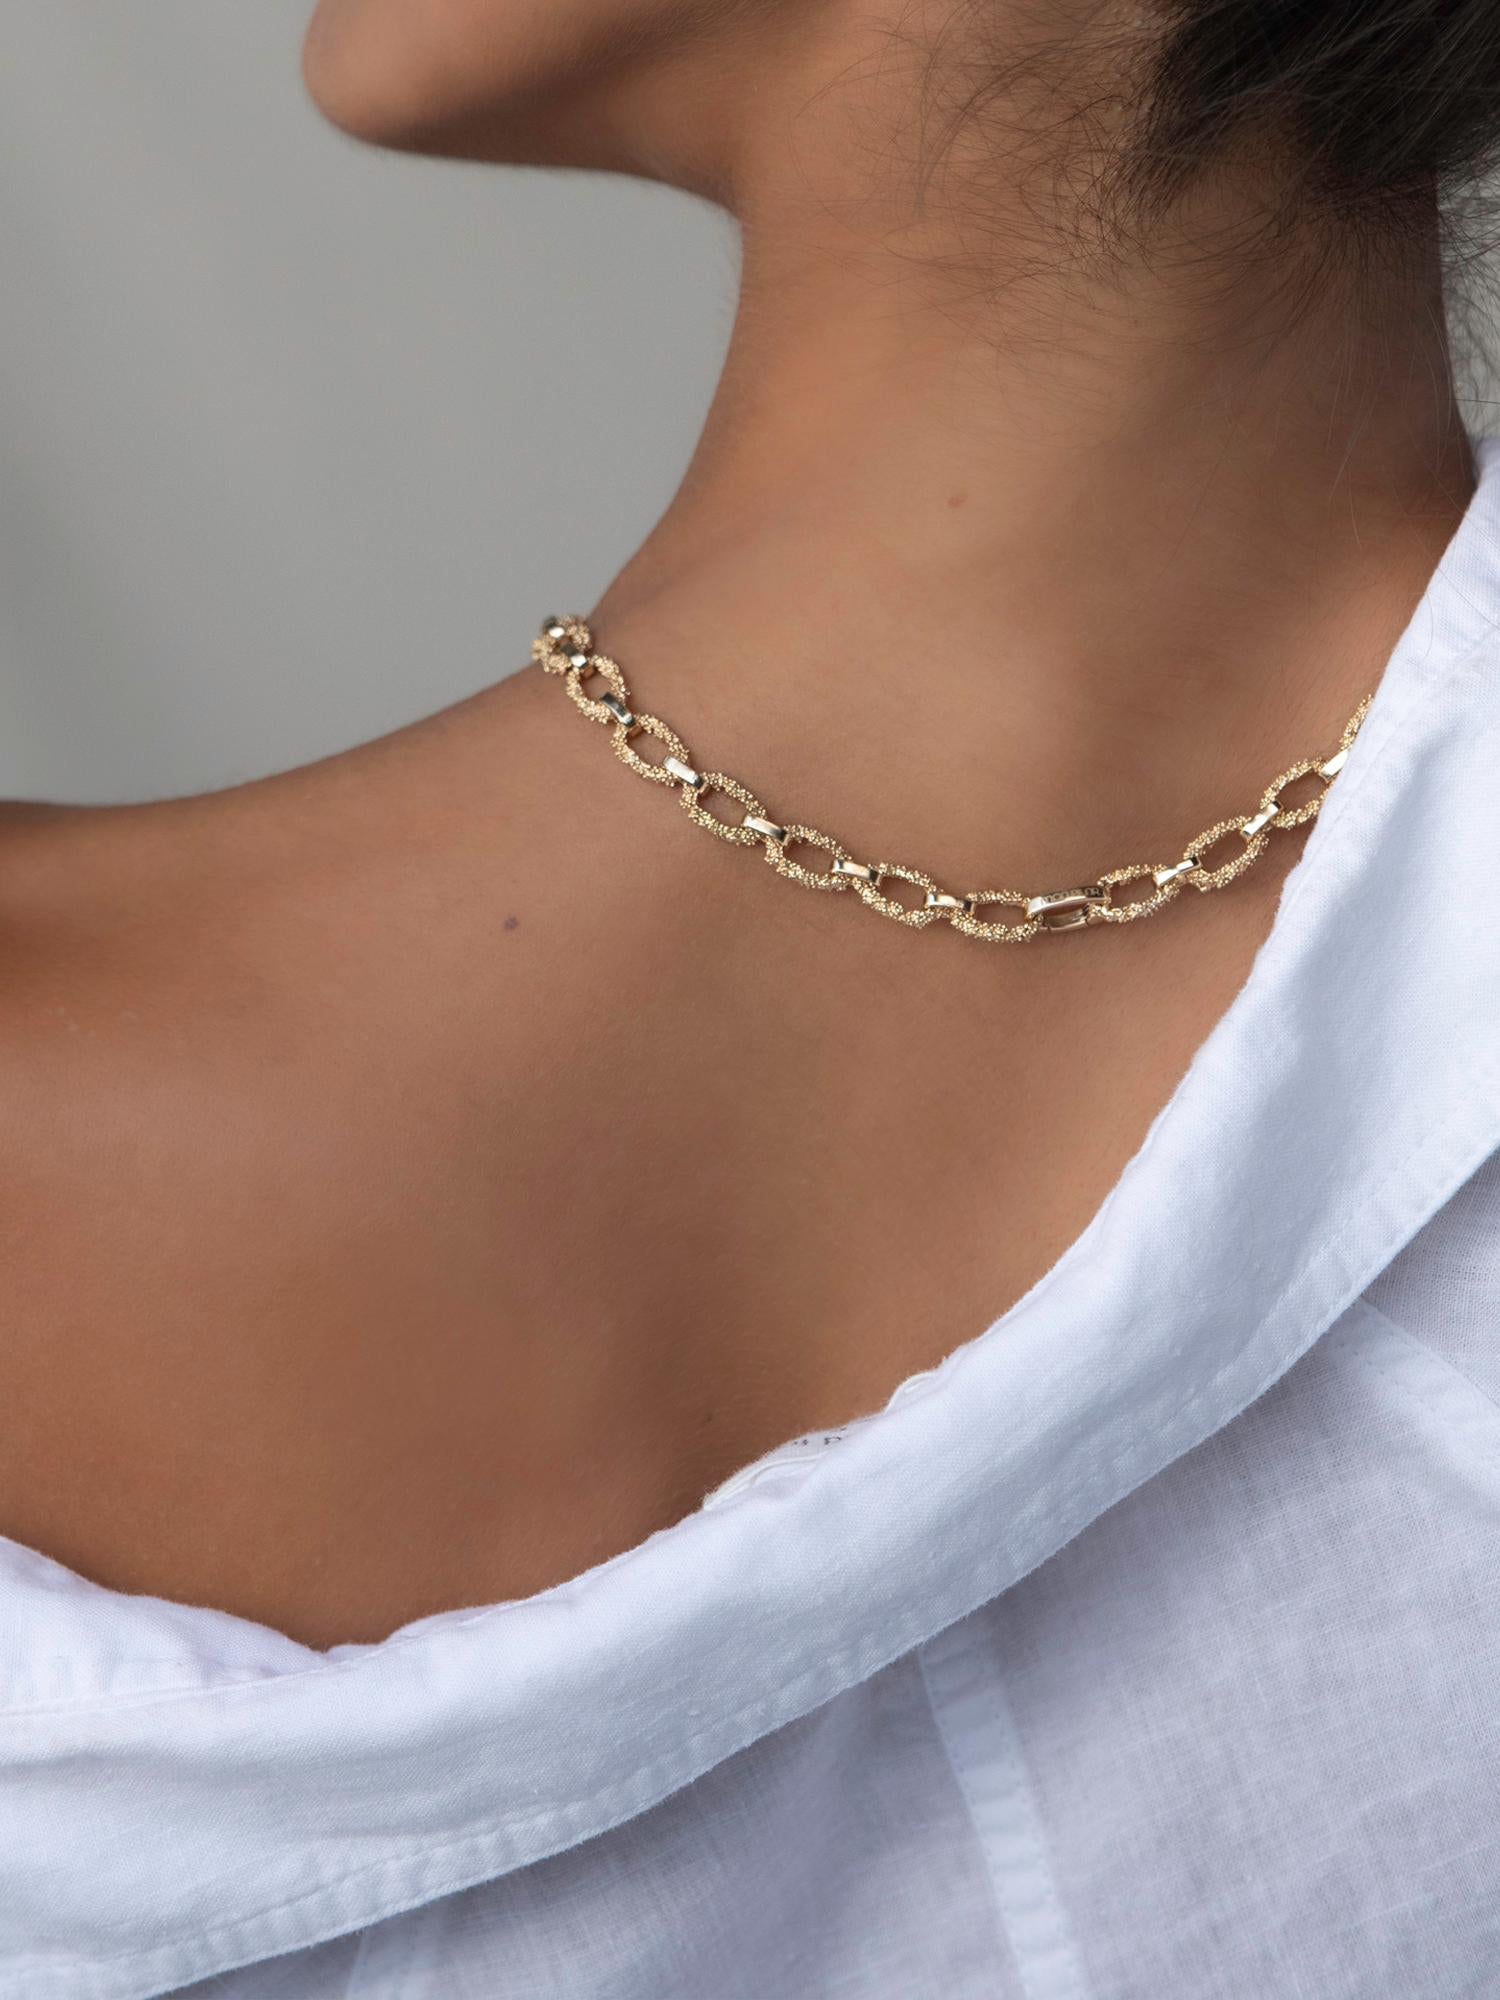 Inspired by the 5,000-year-old technique of granulation and the sandy shores of the greek isles, this handcrafted chain link necklace is as unique as it is stunning. With a seamless oval spring clasp for comfortable and secure fastening you‘ll